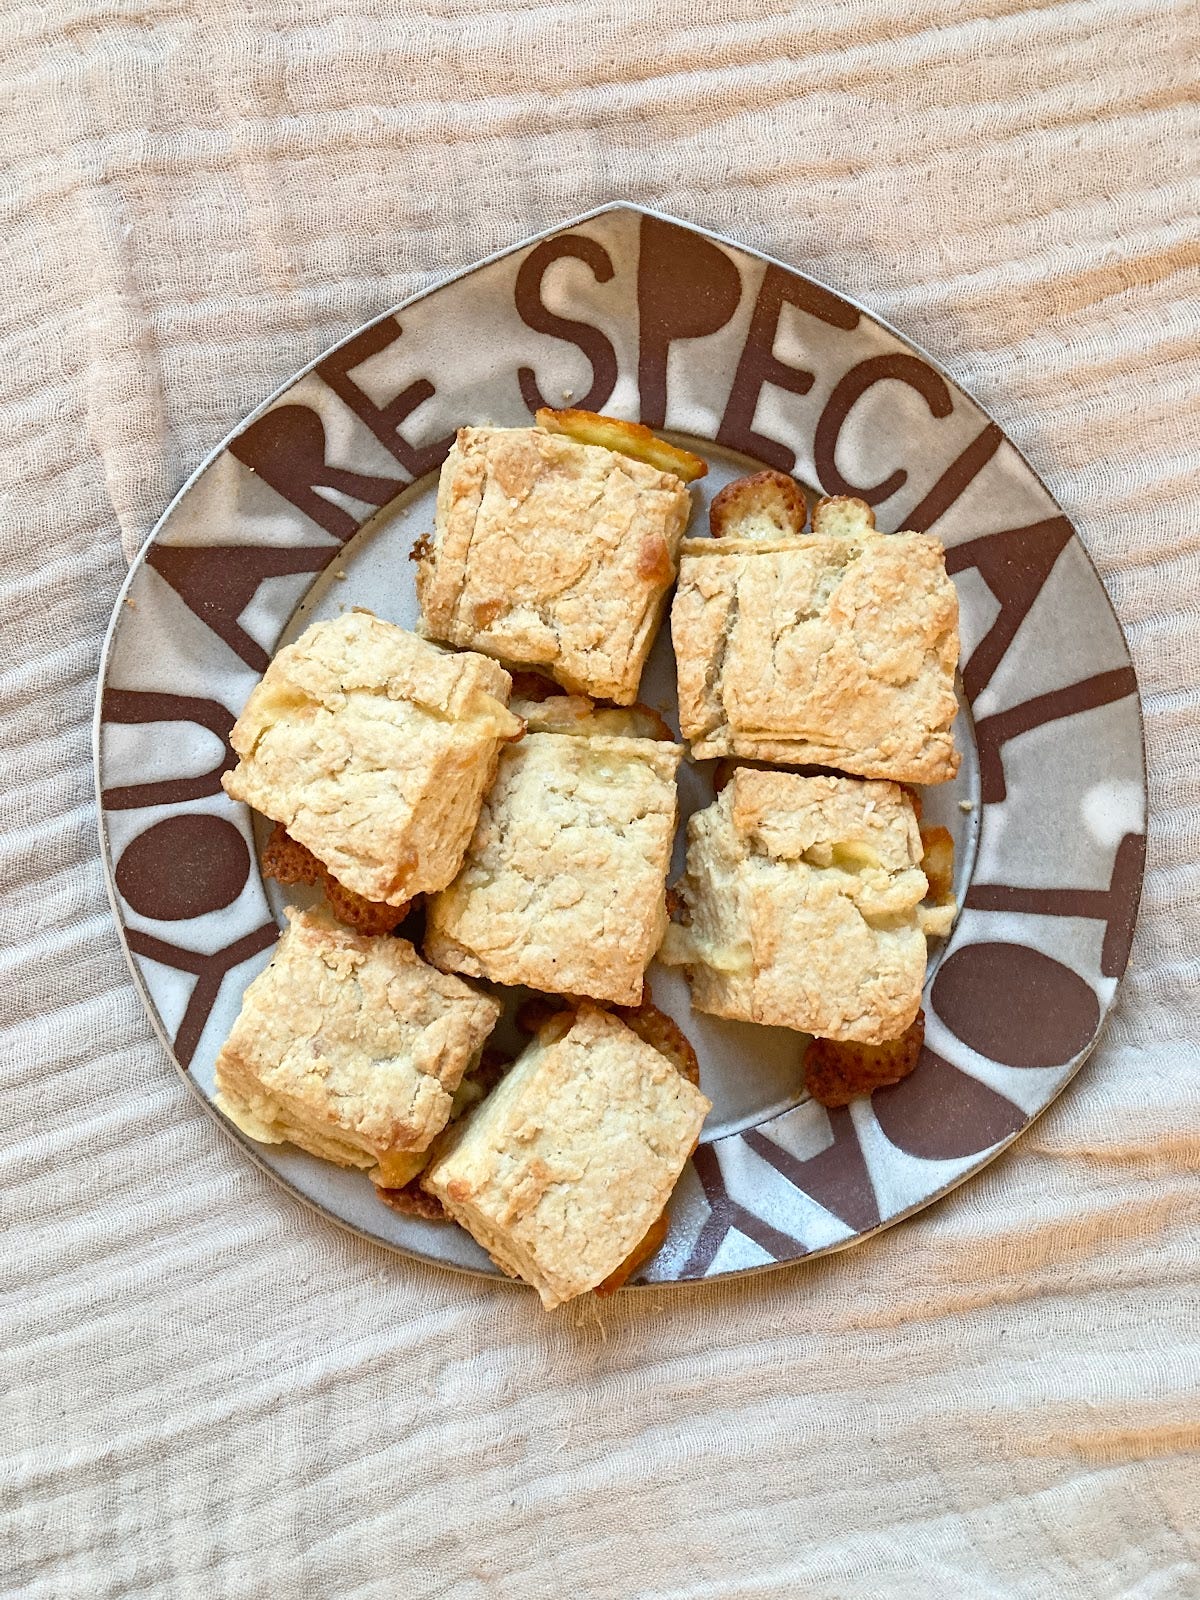 Image of a grey and brown plate that says "You Are Special Today" on the rim. The plate is filled with flaky biscuits.